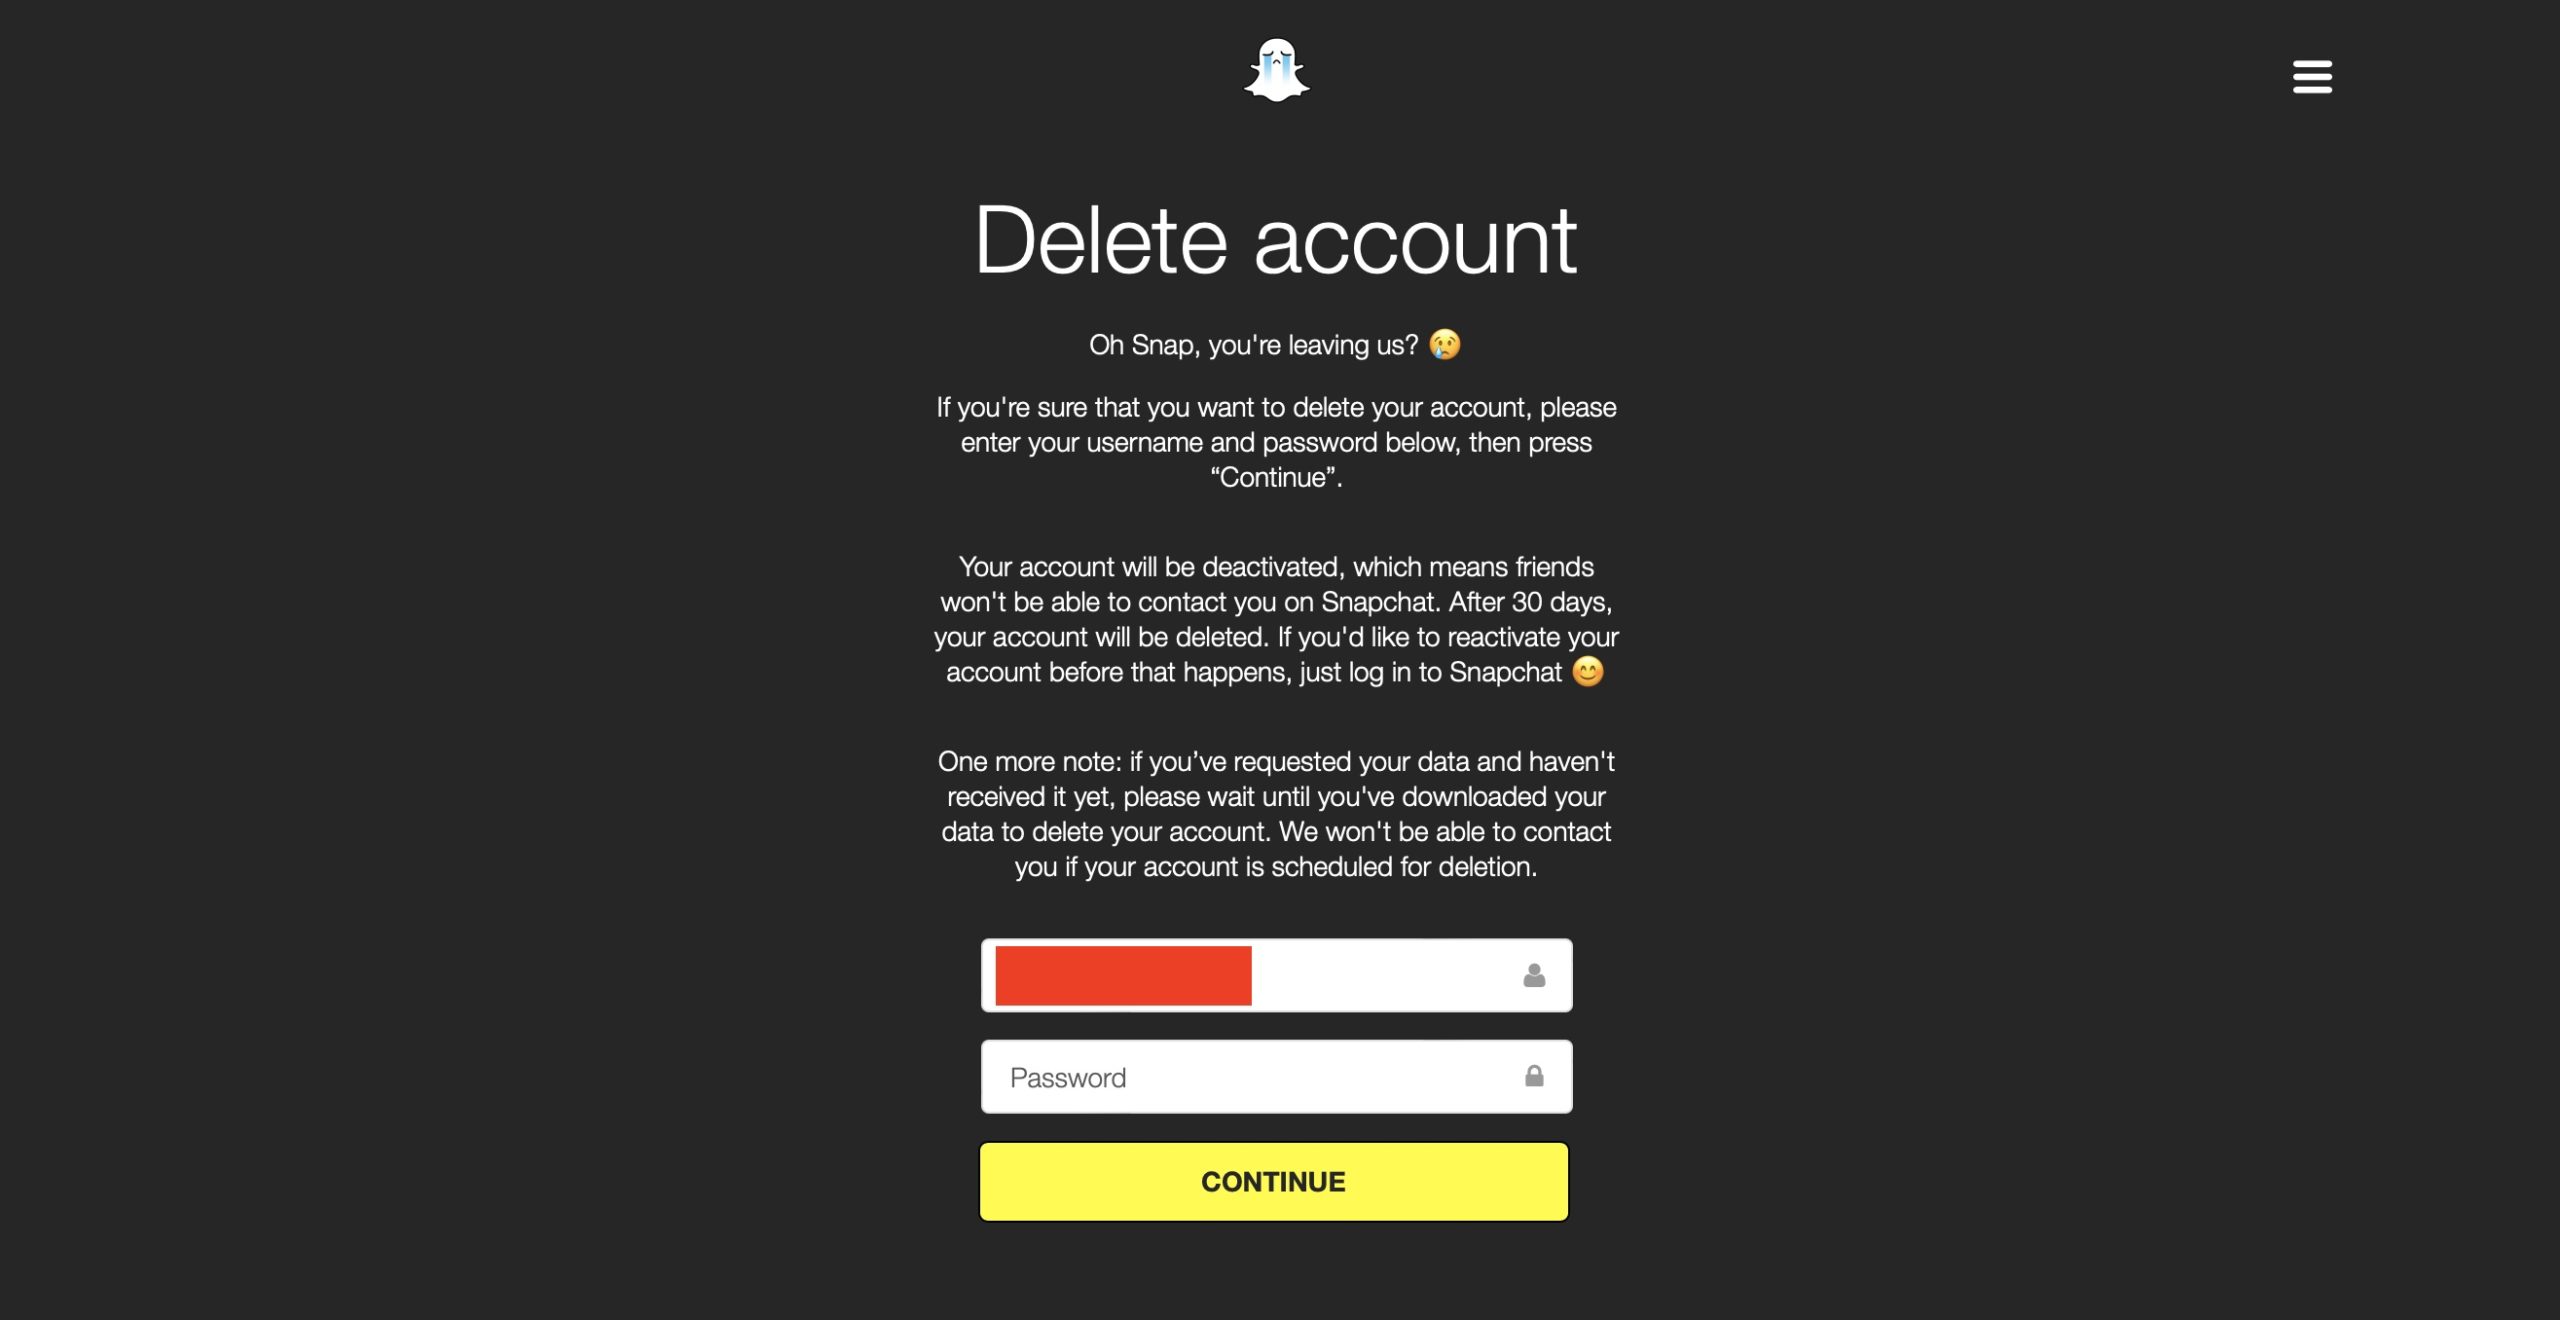 How to delete your Snapchat account